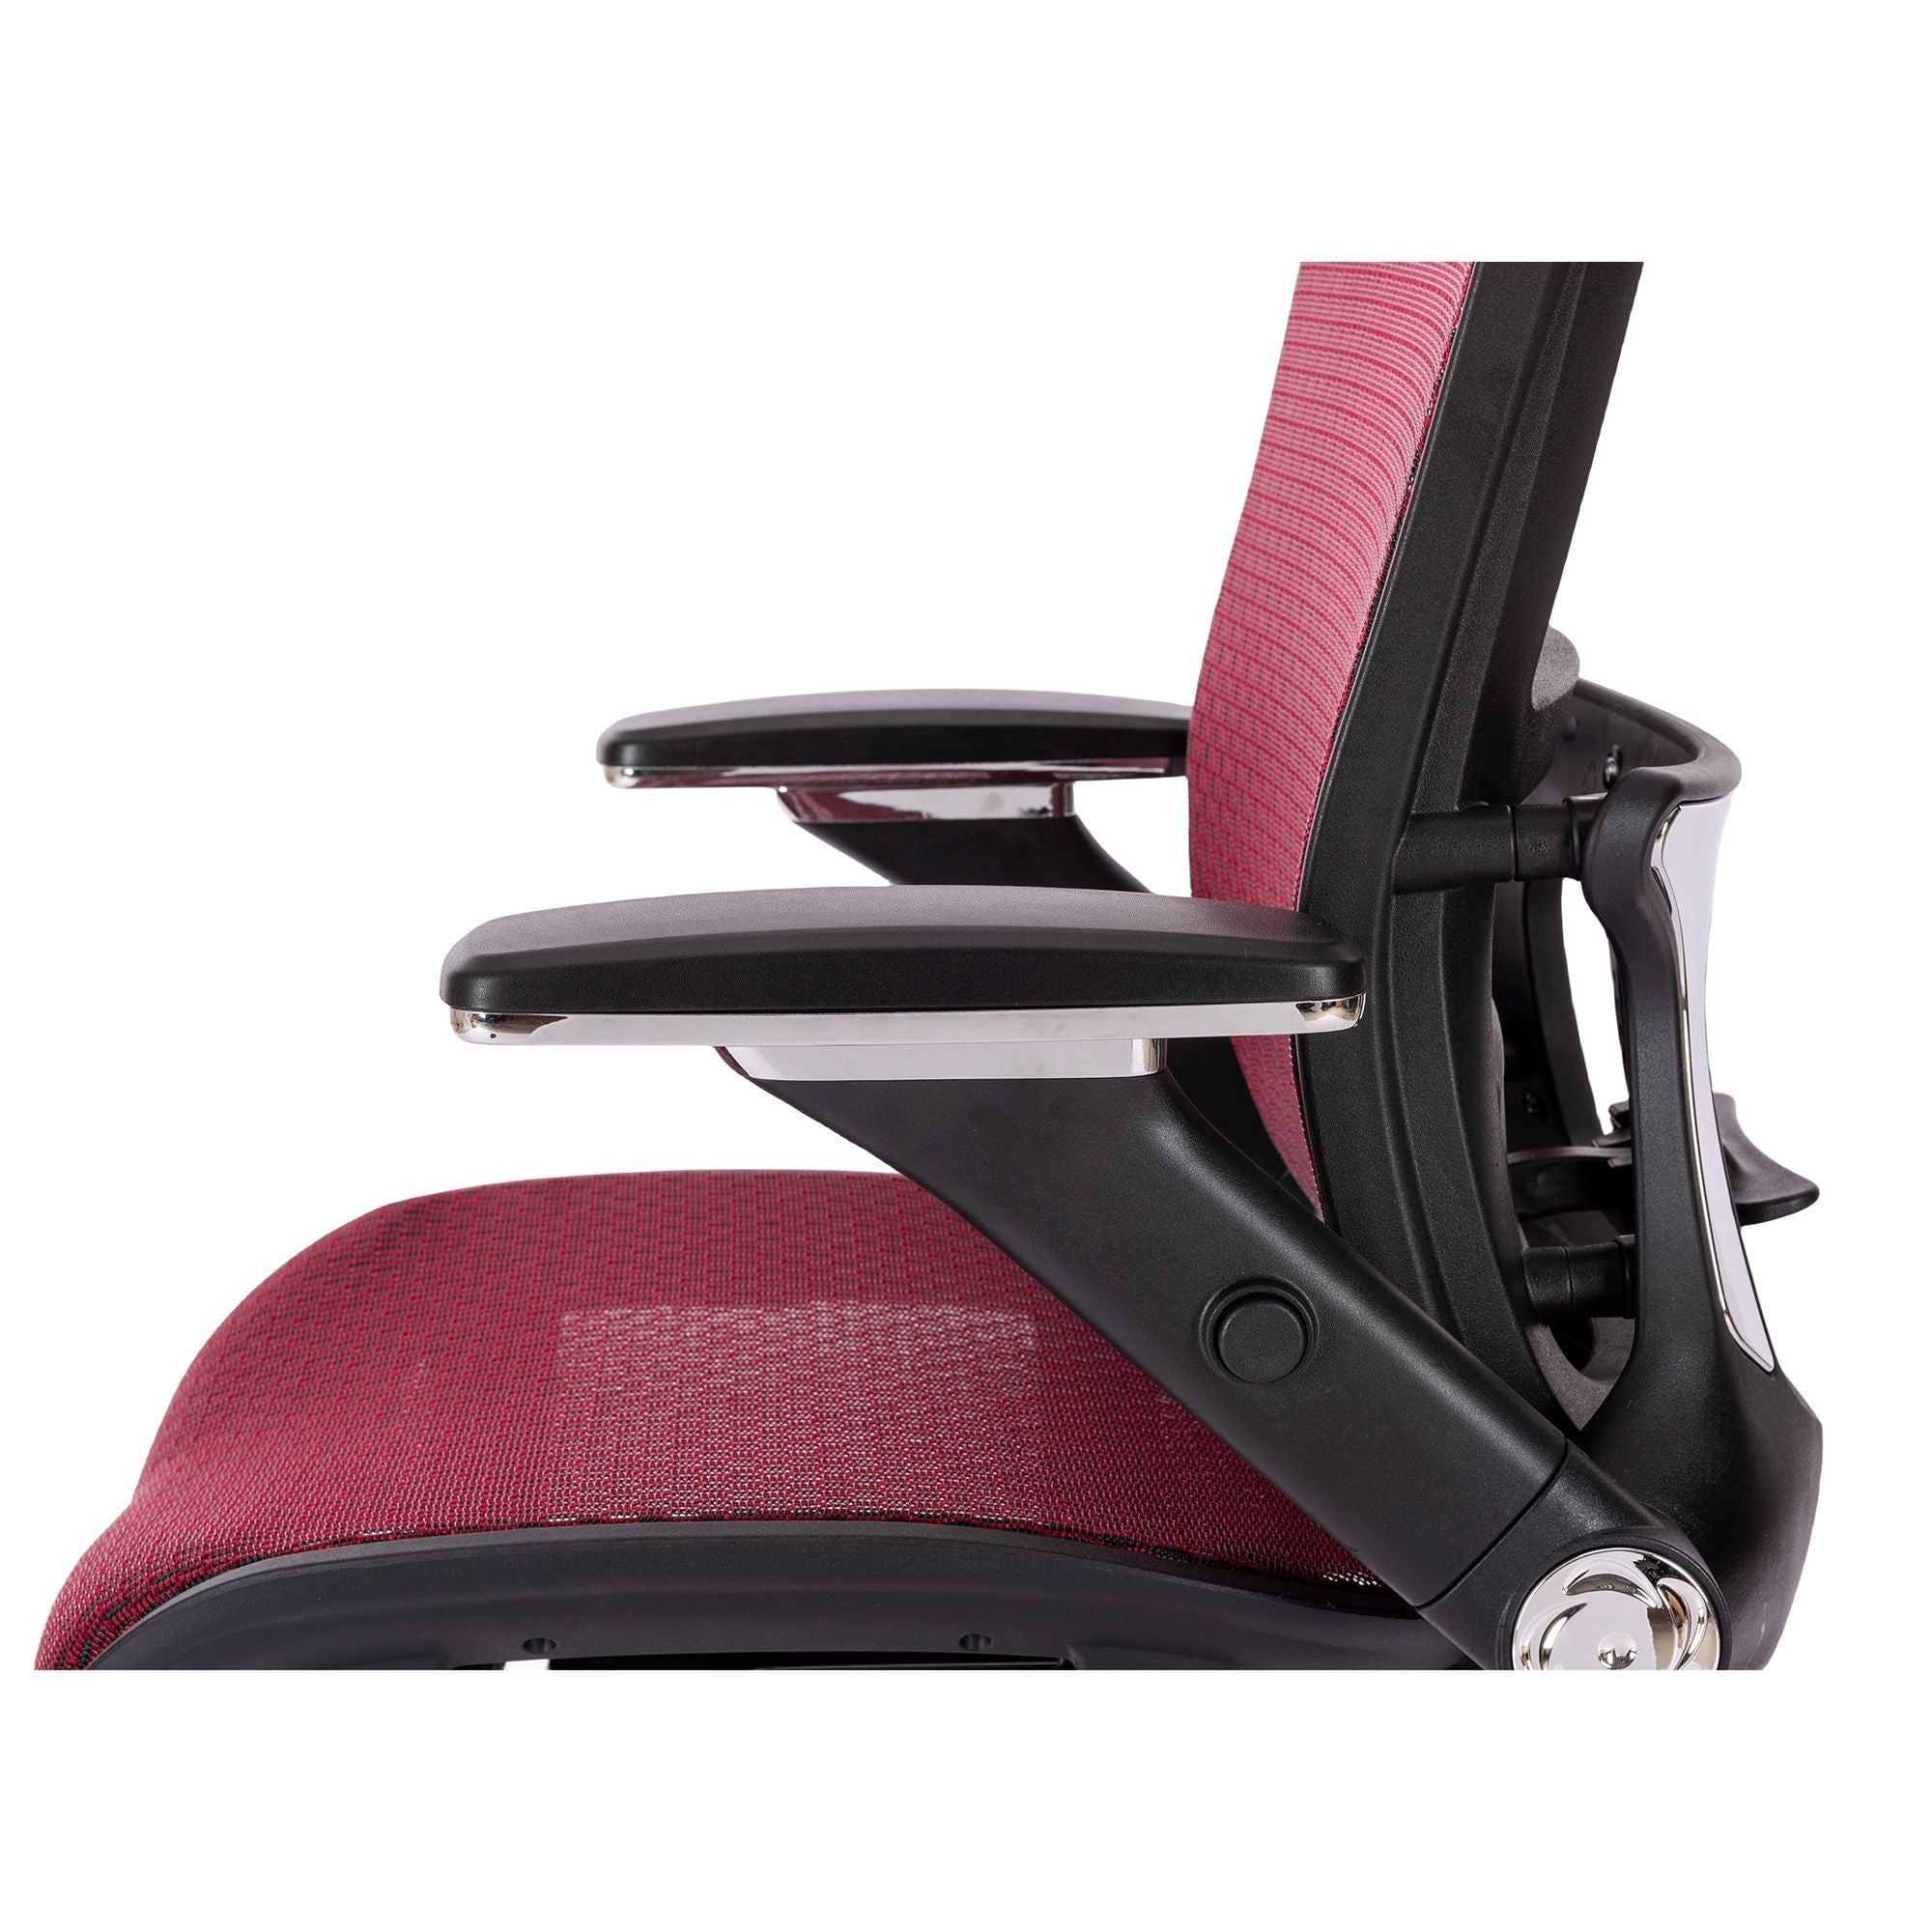 RED Ergonomic Mesh Office Chair, High Back Adjustable red-office-american design-office